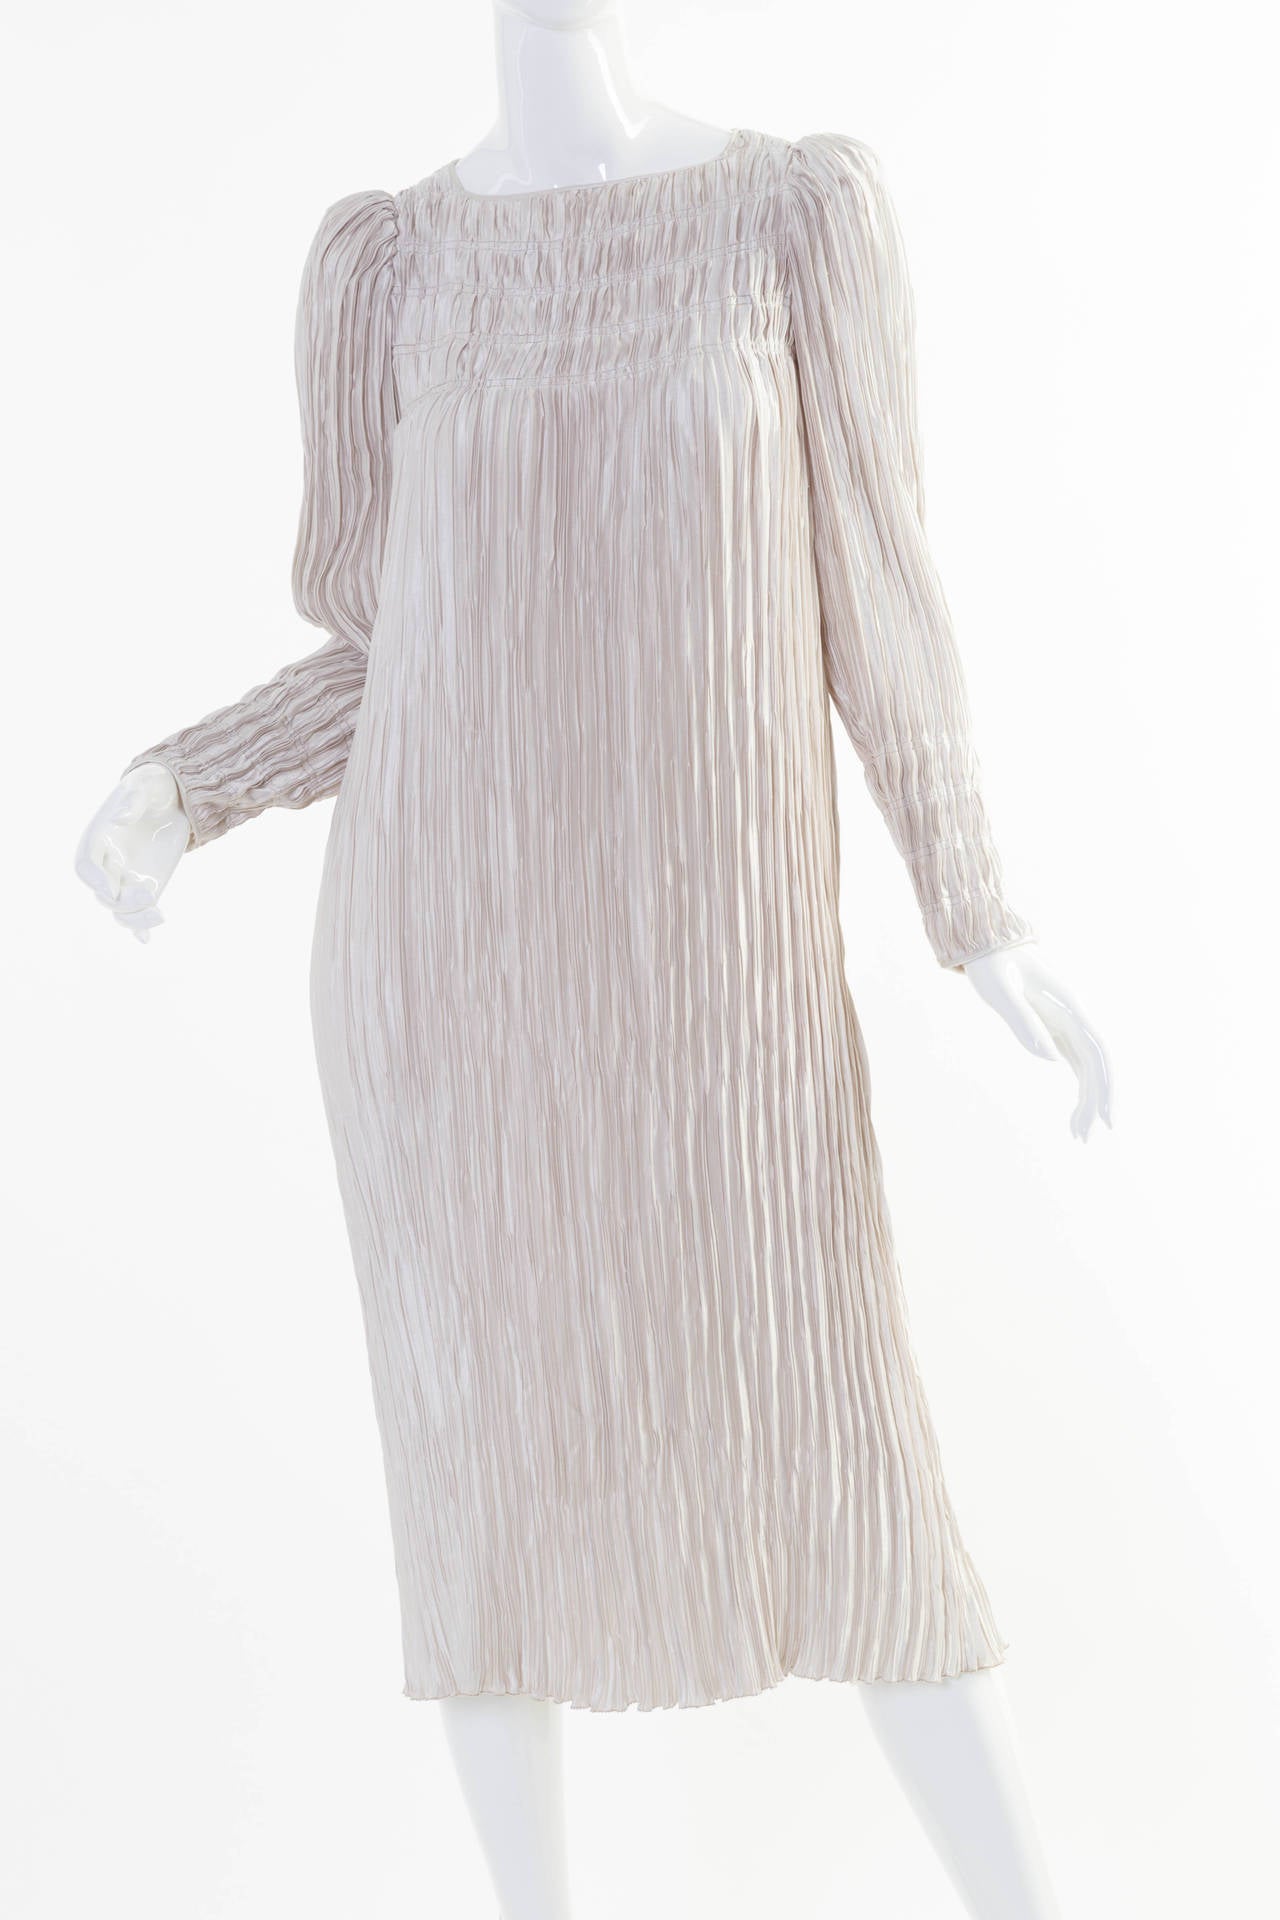 This  is   Mary McFadden Couture dress is made up of fortuny style pleats. The color is a silver grey, (with out being metallic).  The sleeves are long and can be worn scrunched up as well. The length is about mid calf. This dress also comes with an